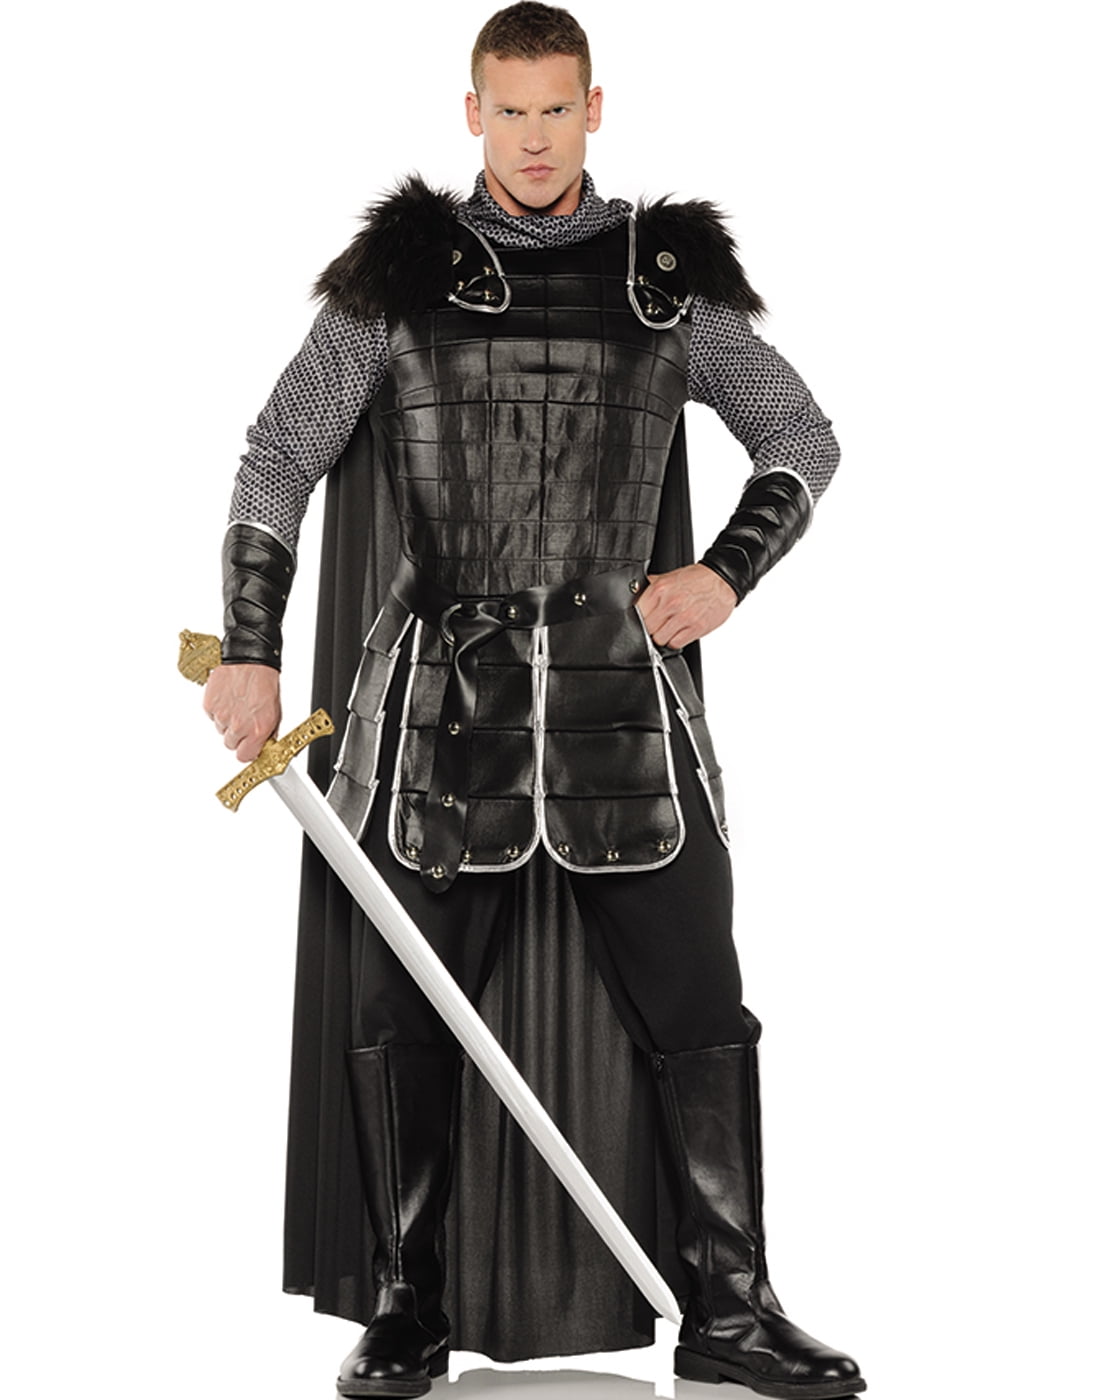 Adult BLACK KNIGHT King Arthur St Georges Medieval Fancy Dress Costume Male S-XL 